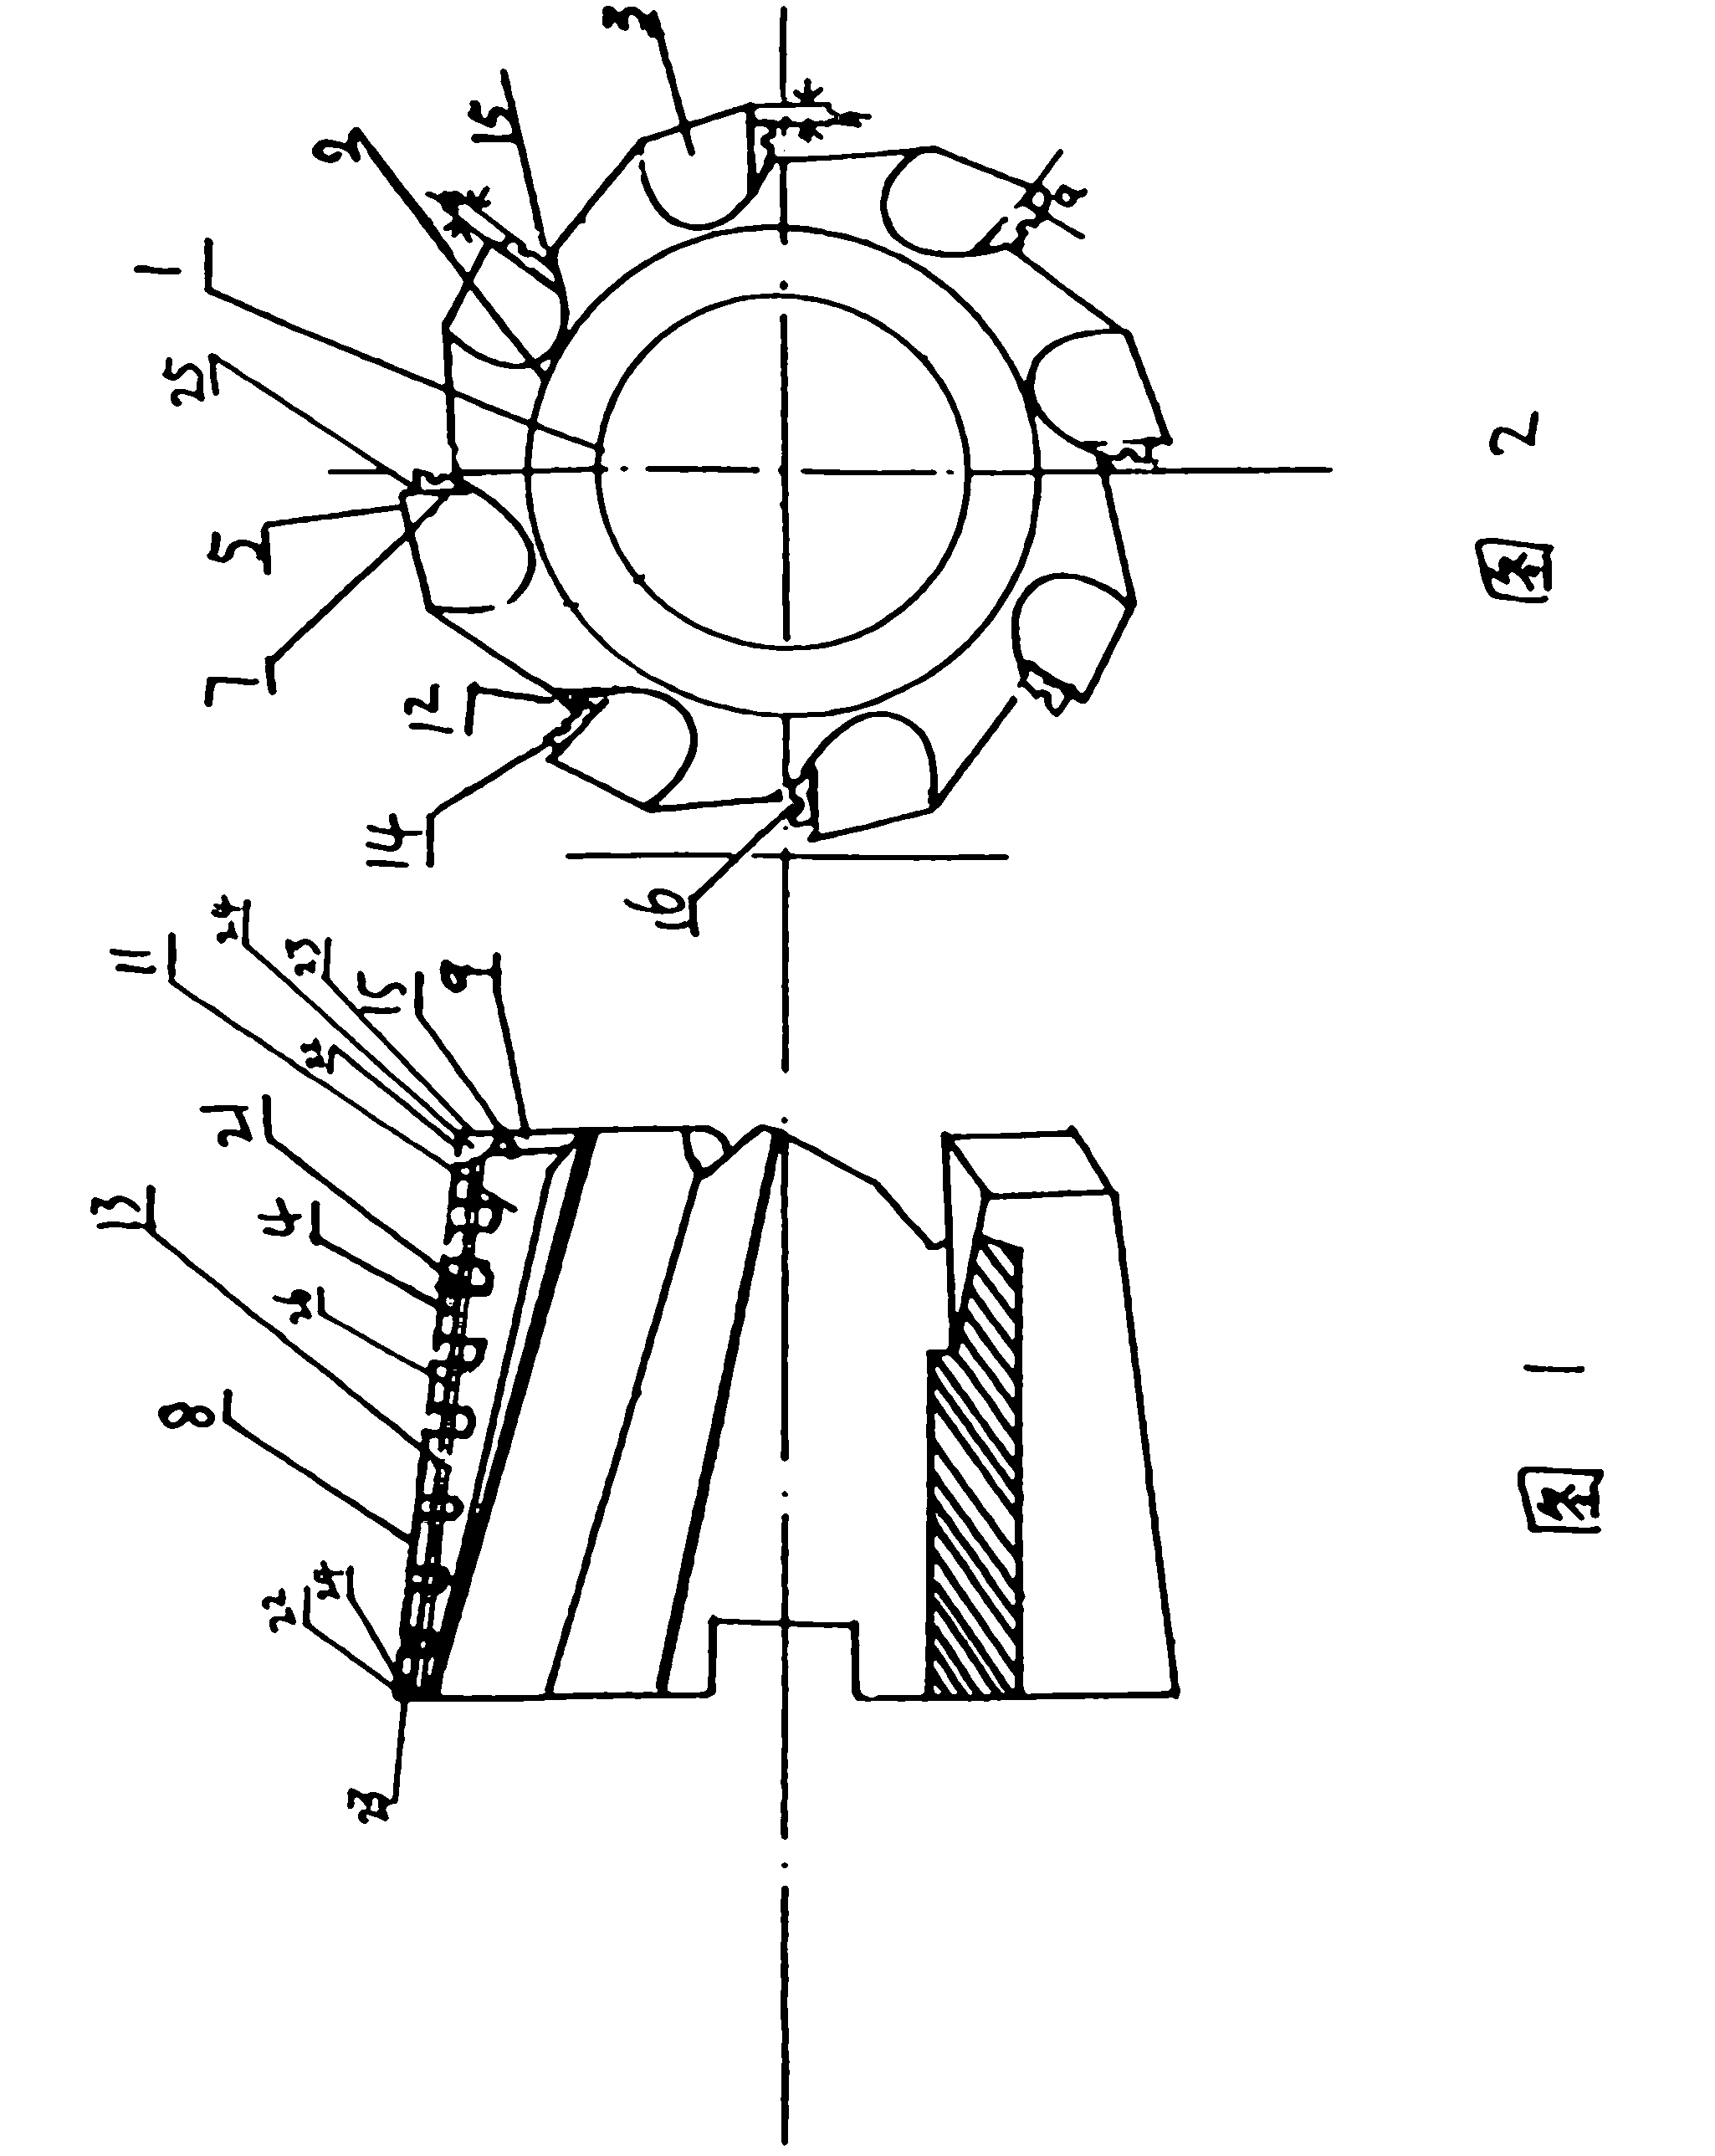 Composite milling cutter